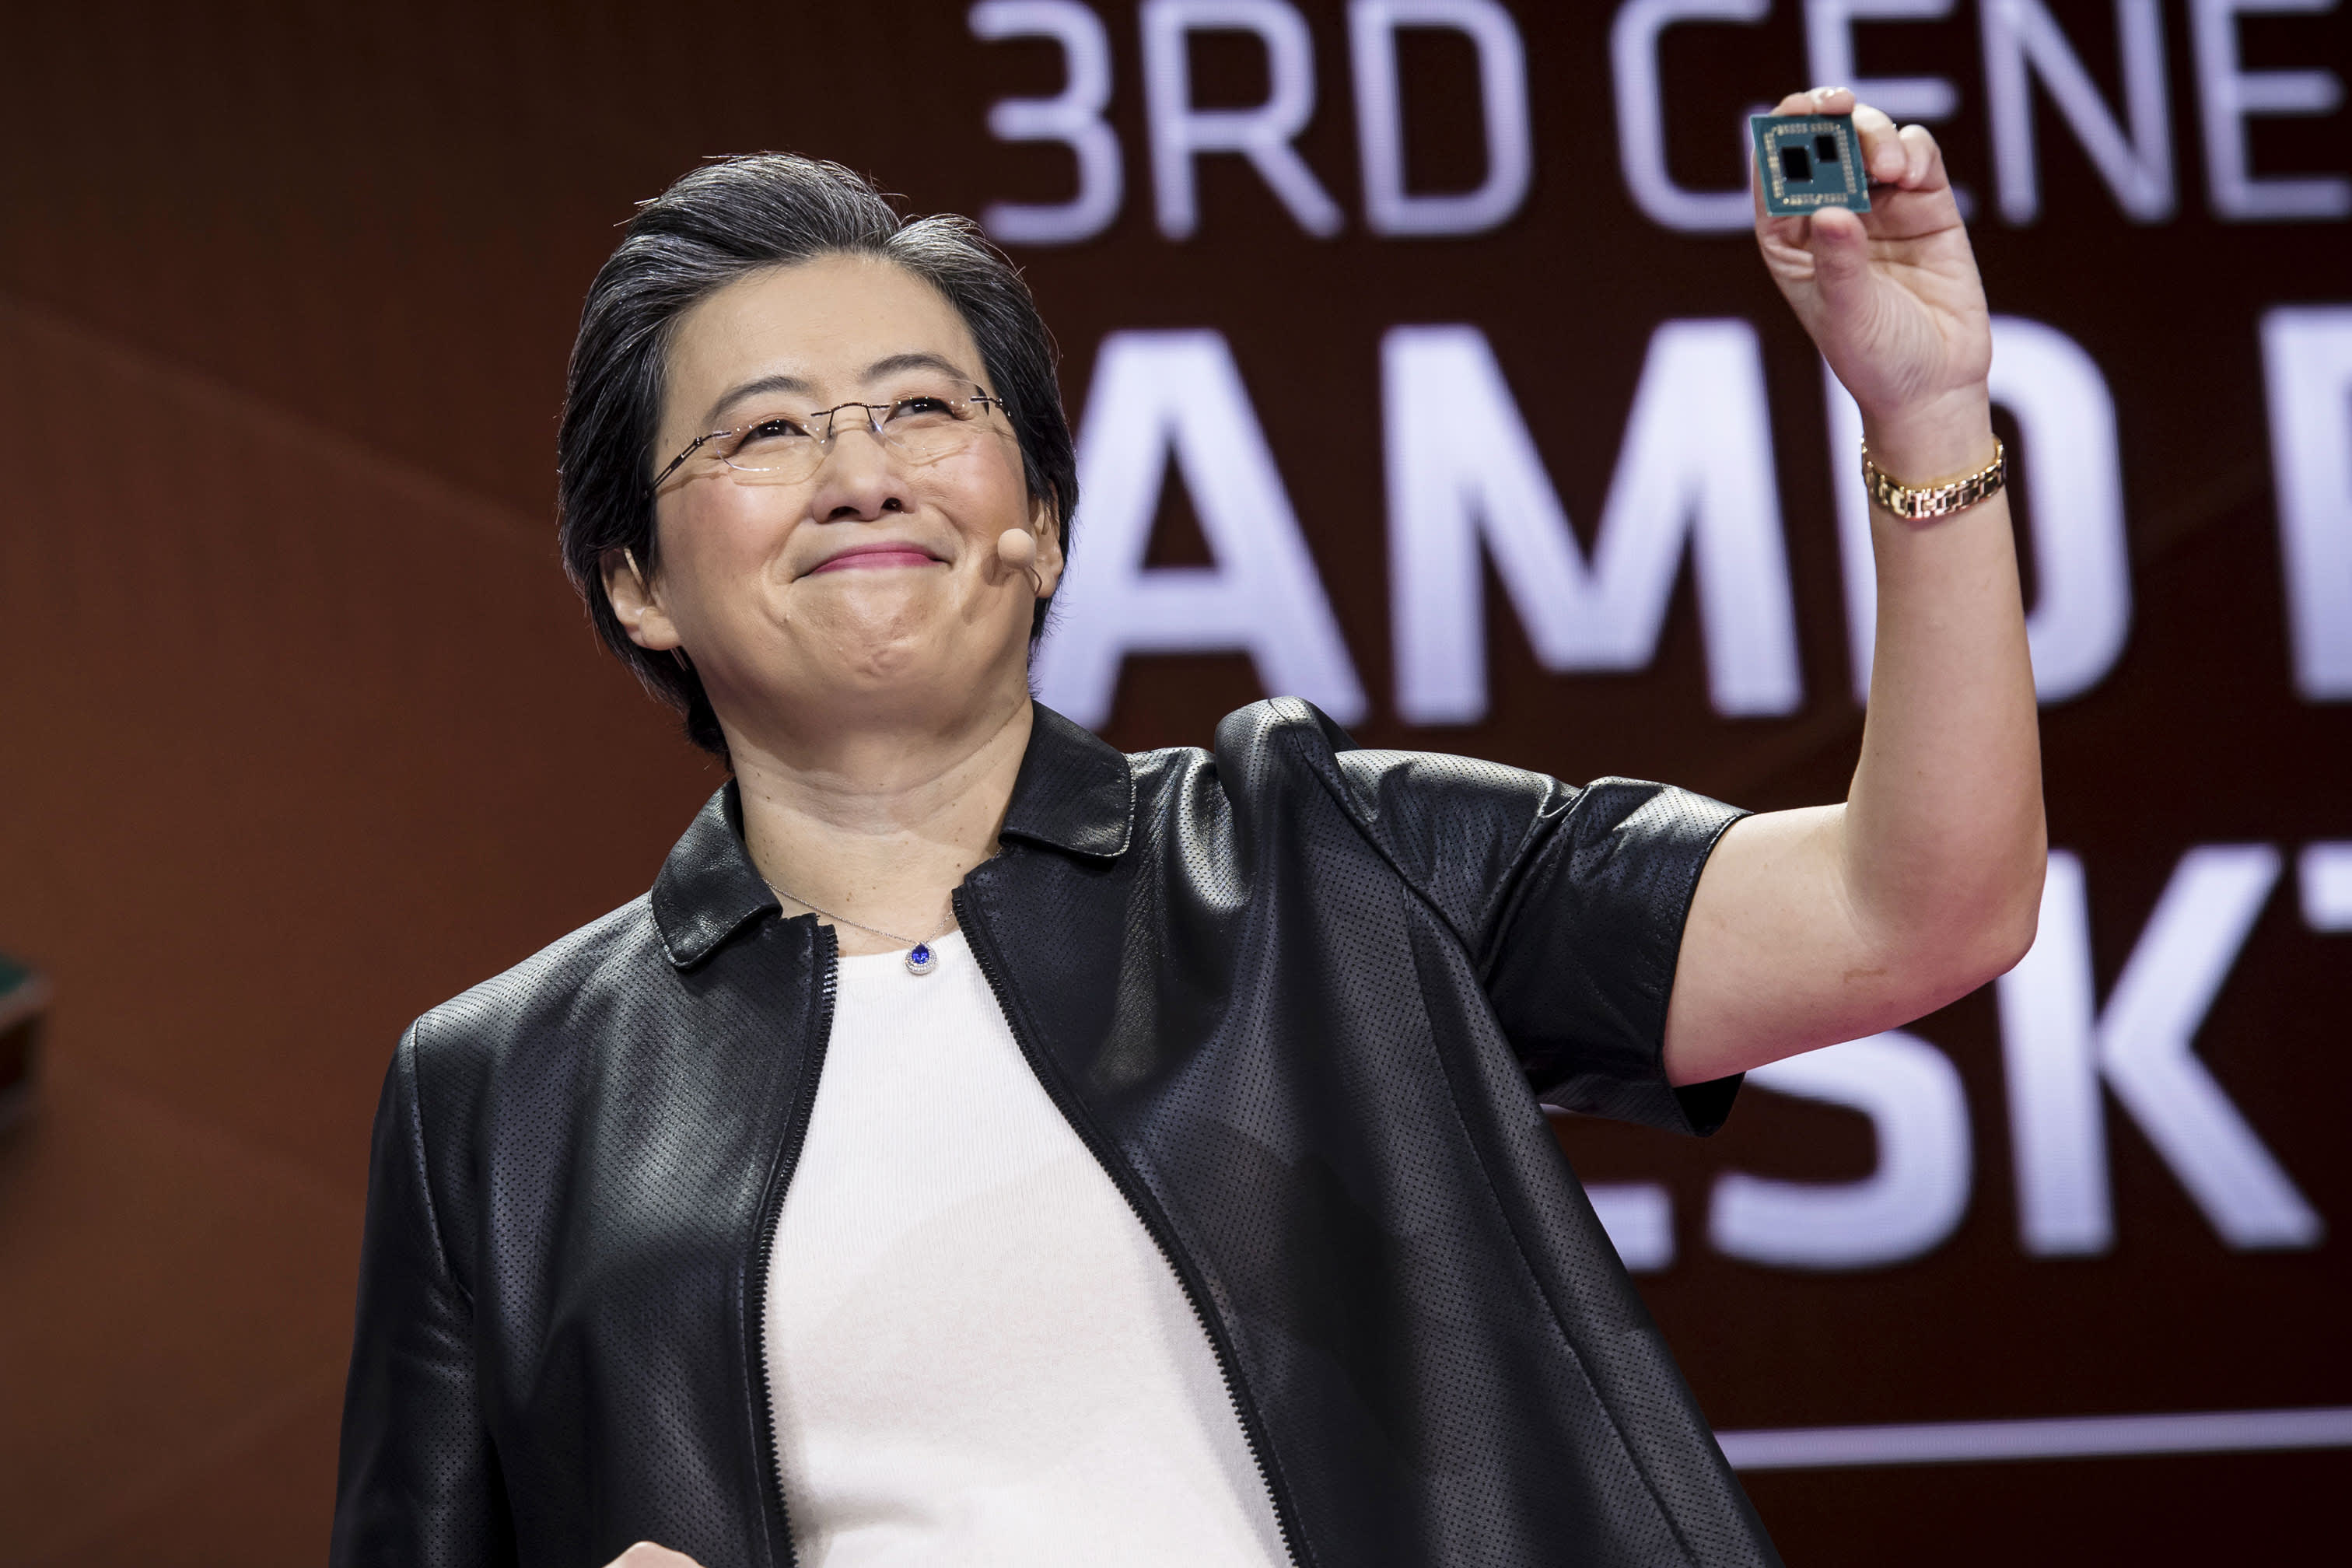 We are reassured by AMD CEO's confidence in the chipmaker's data-center business